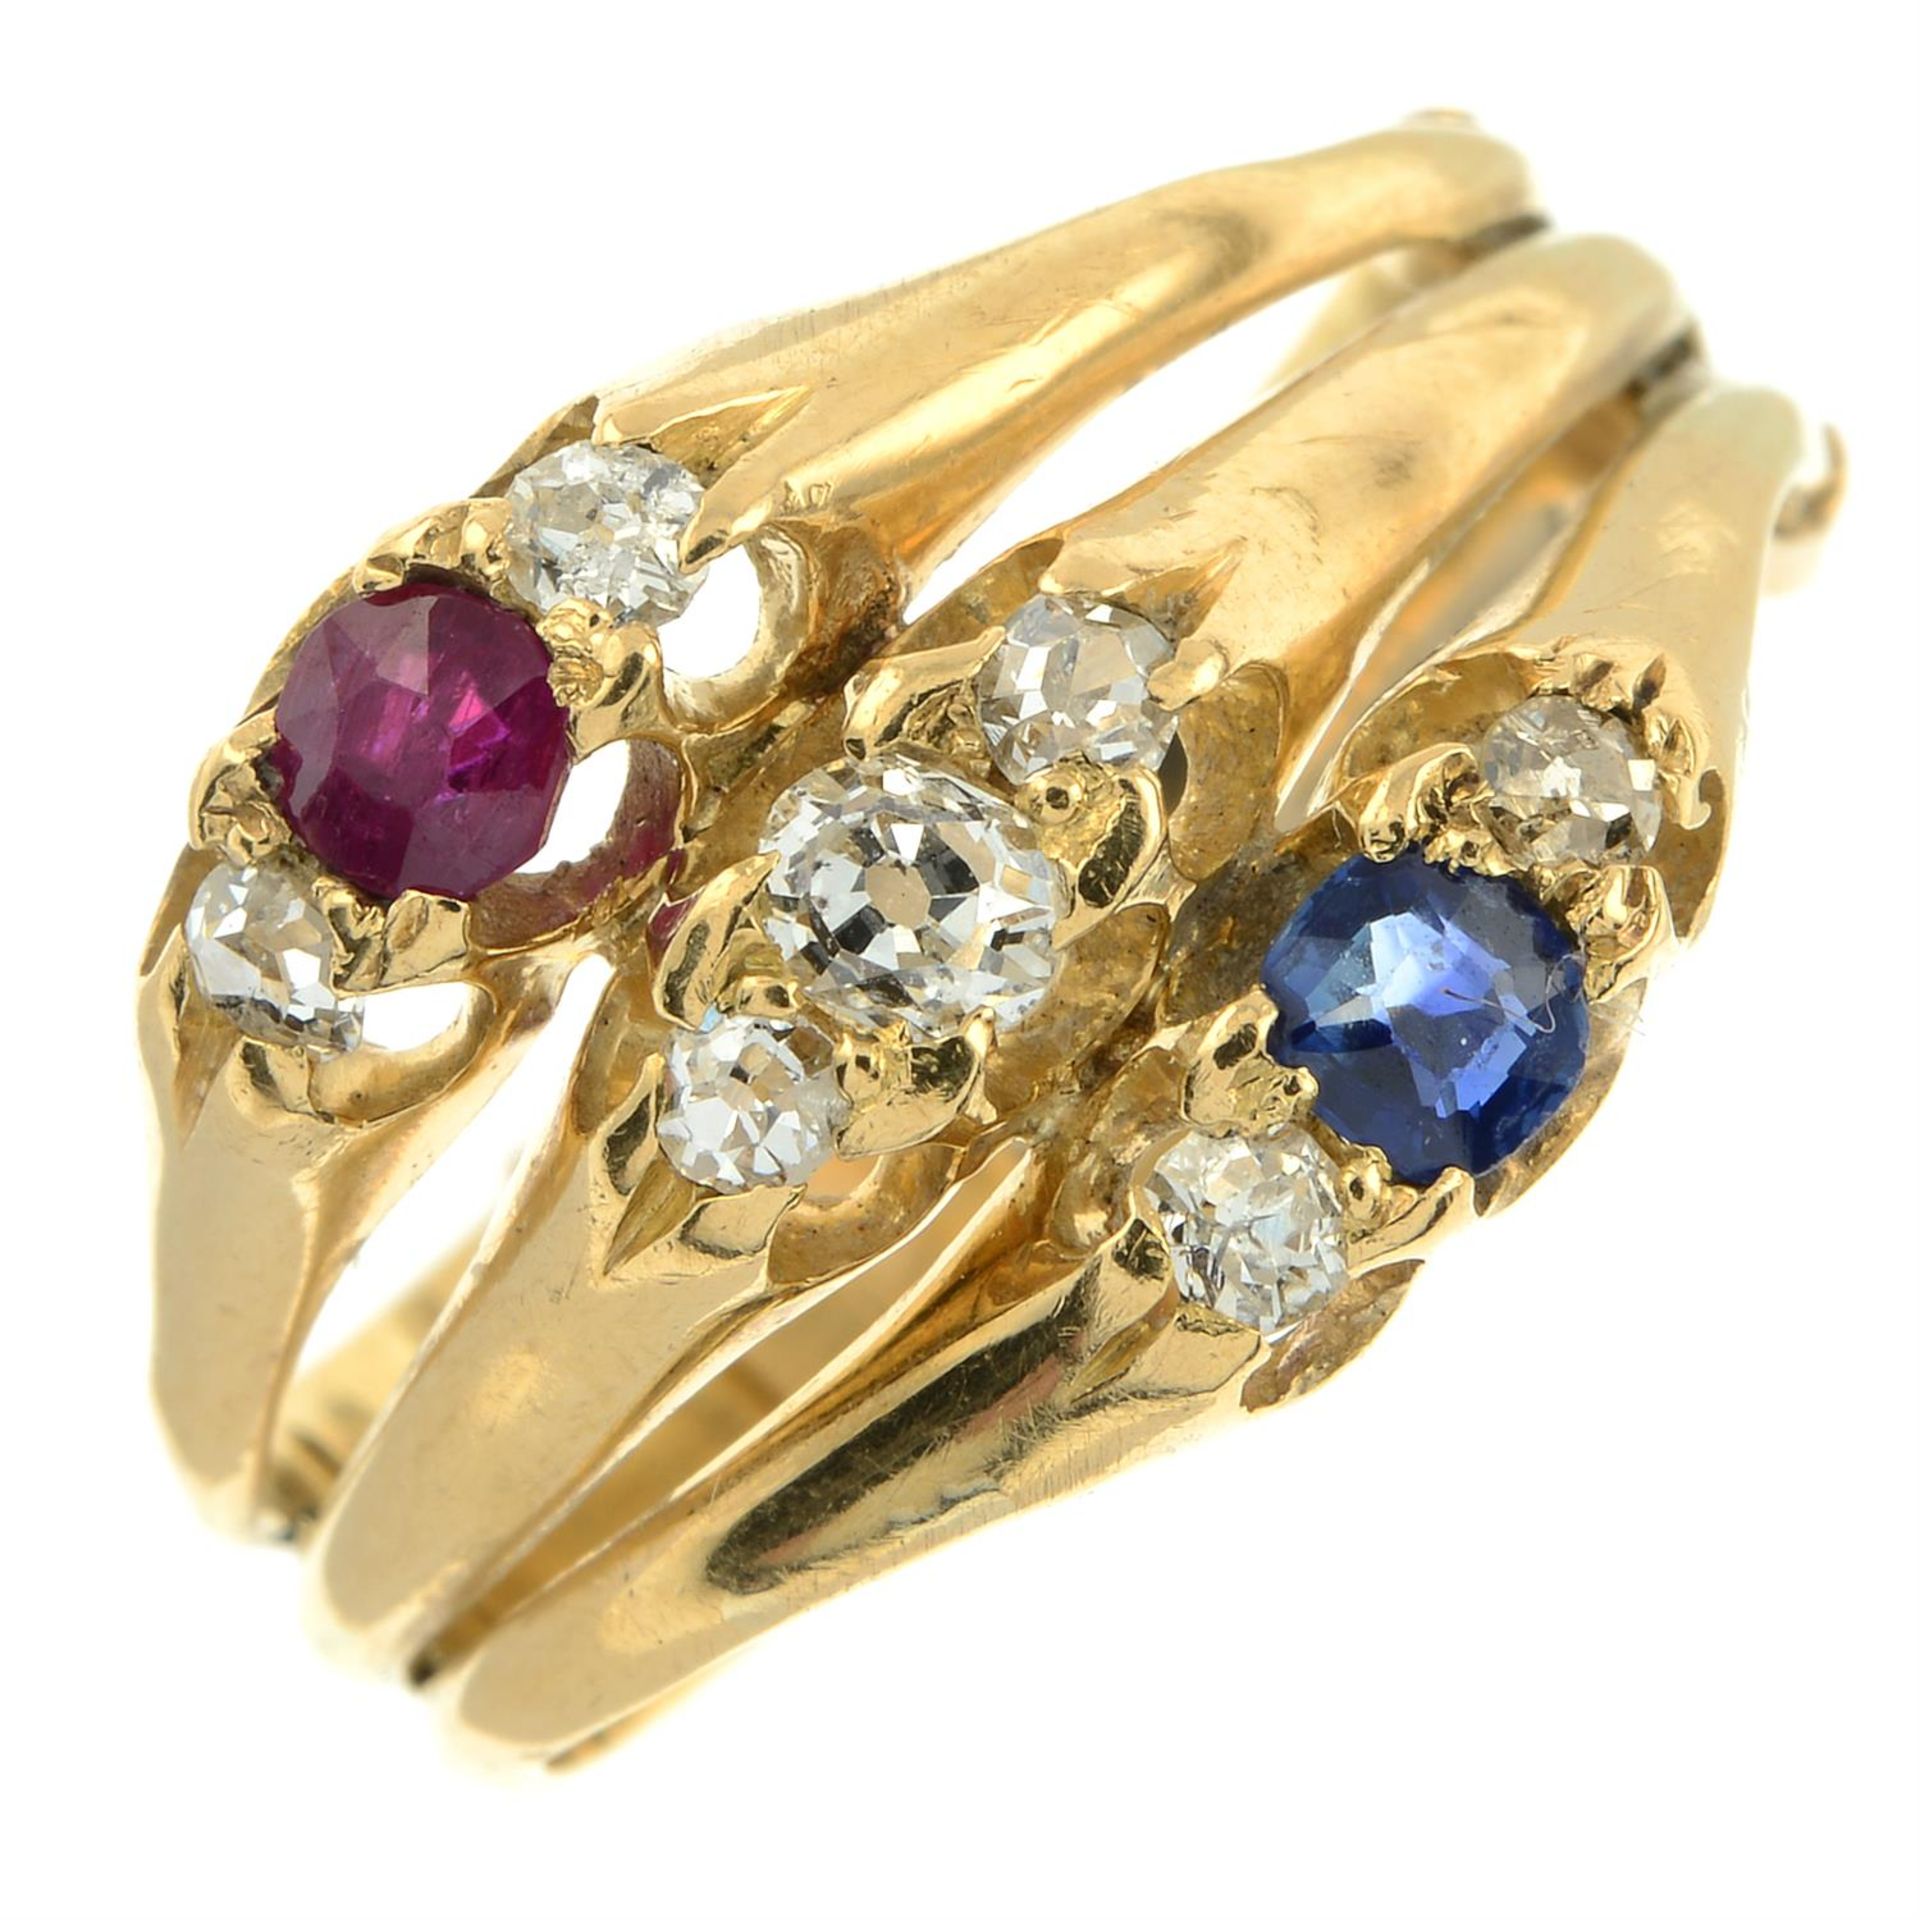 An early 20th century 18ct gold ruby, diamond and sapphire patriotic ring. - Image 2 of 5